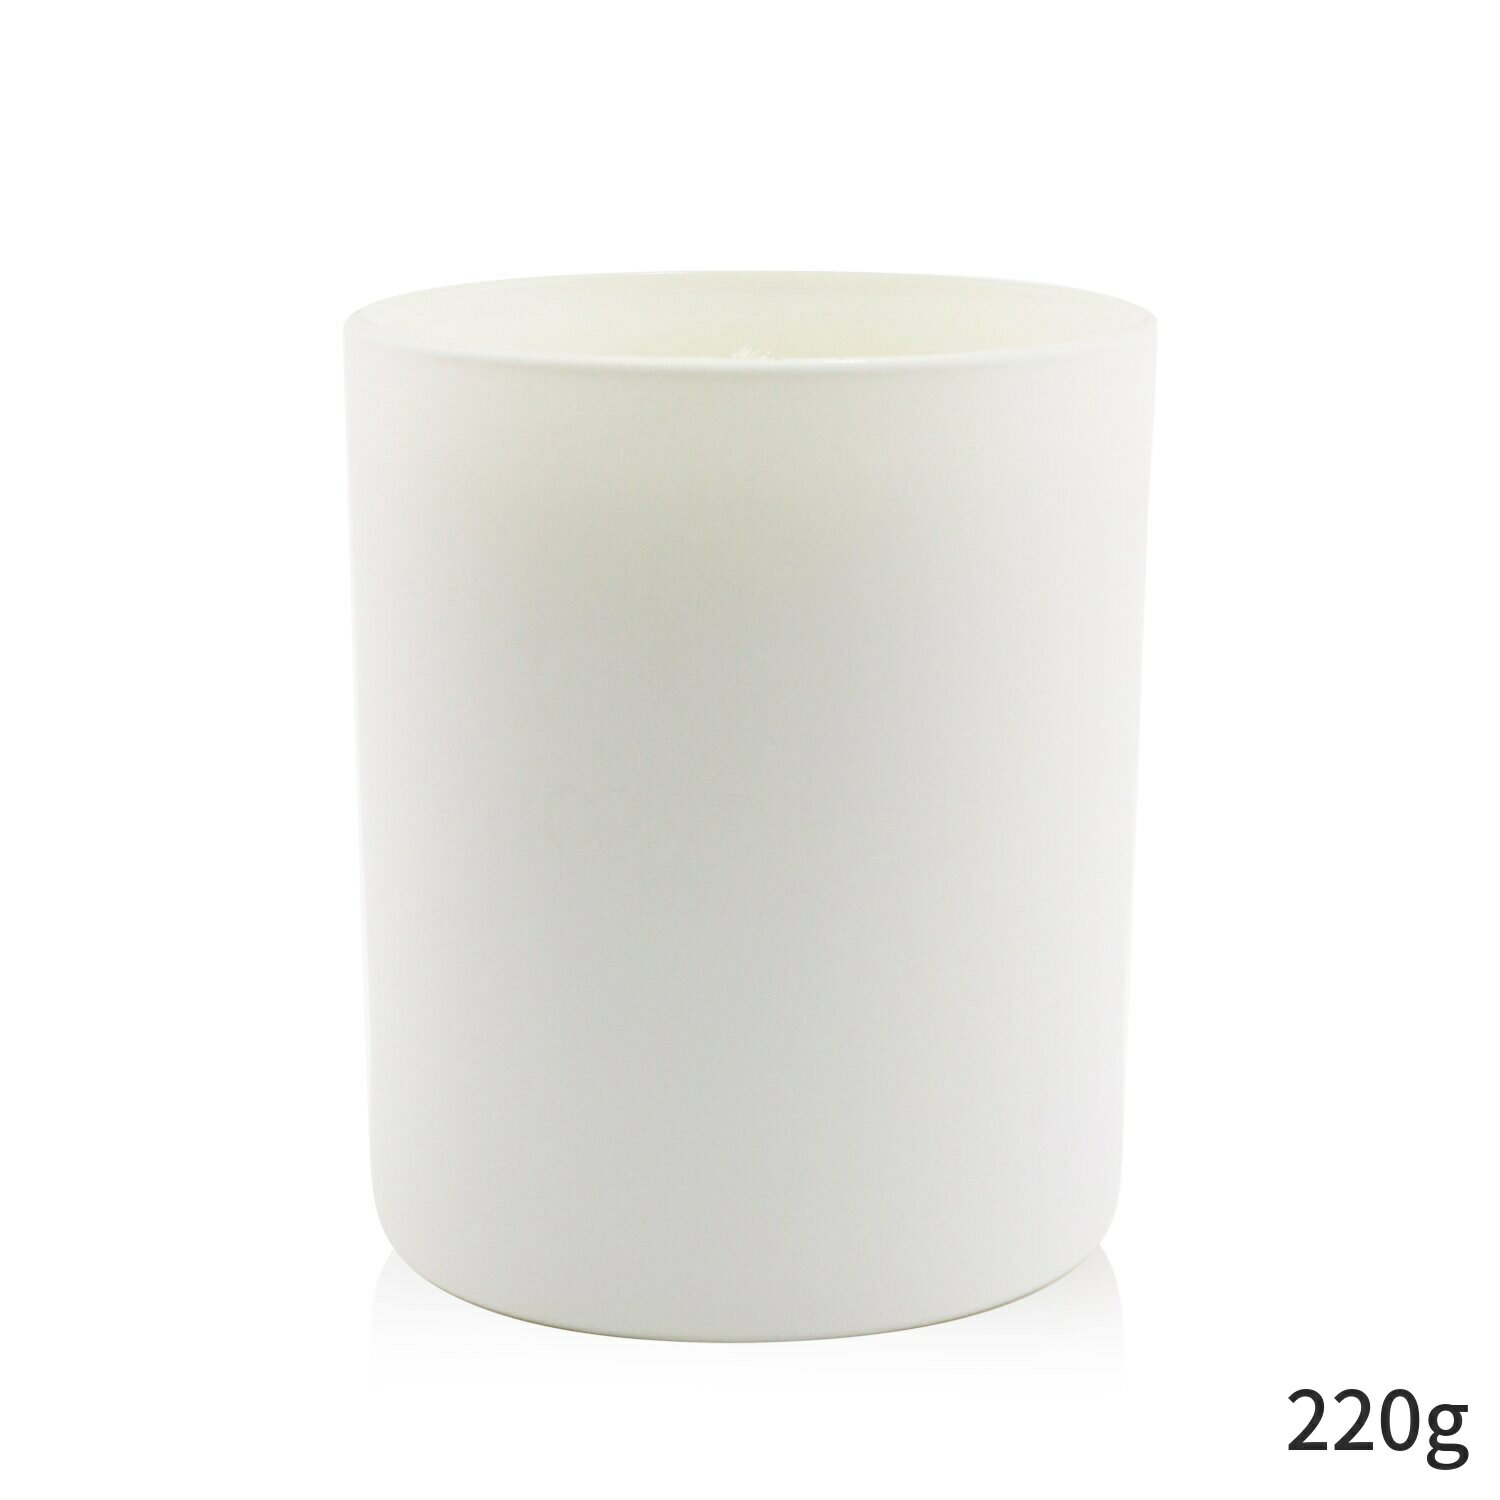 JEVFbh Lh Cowshed tOXLh   Candle - Indulge 220g z[tOX ̓ v[g Mtg 2024 lC uh RX